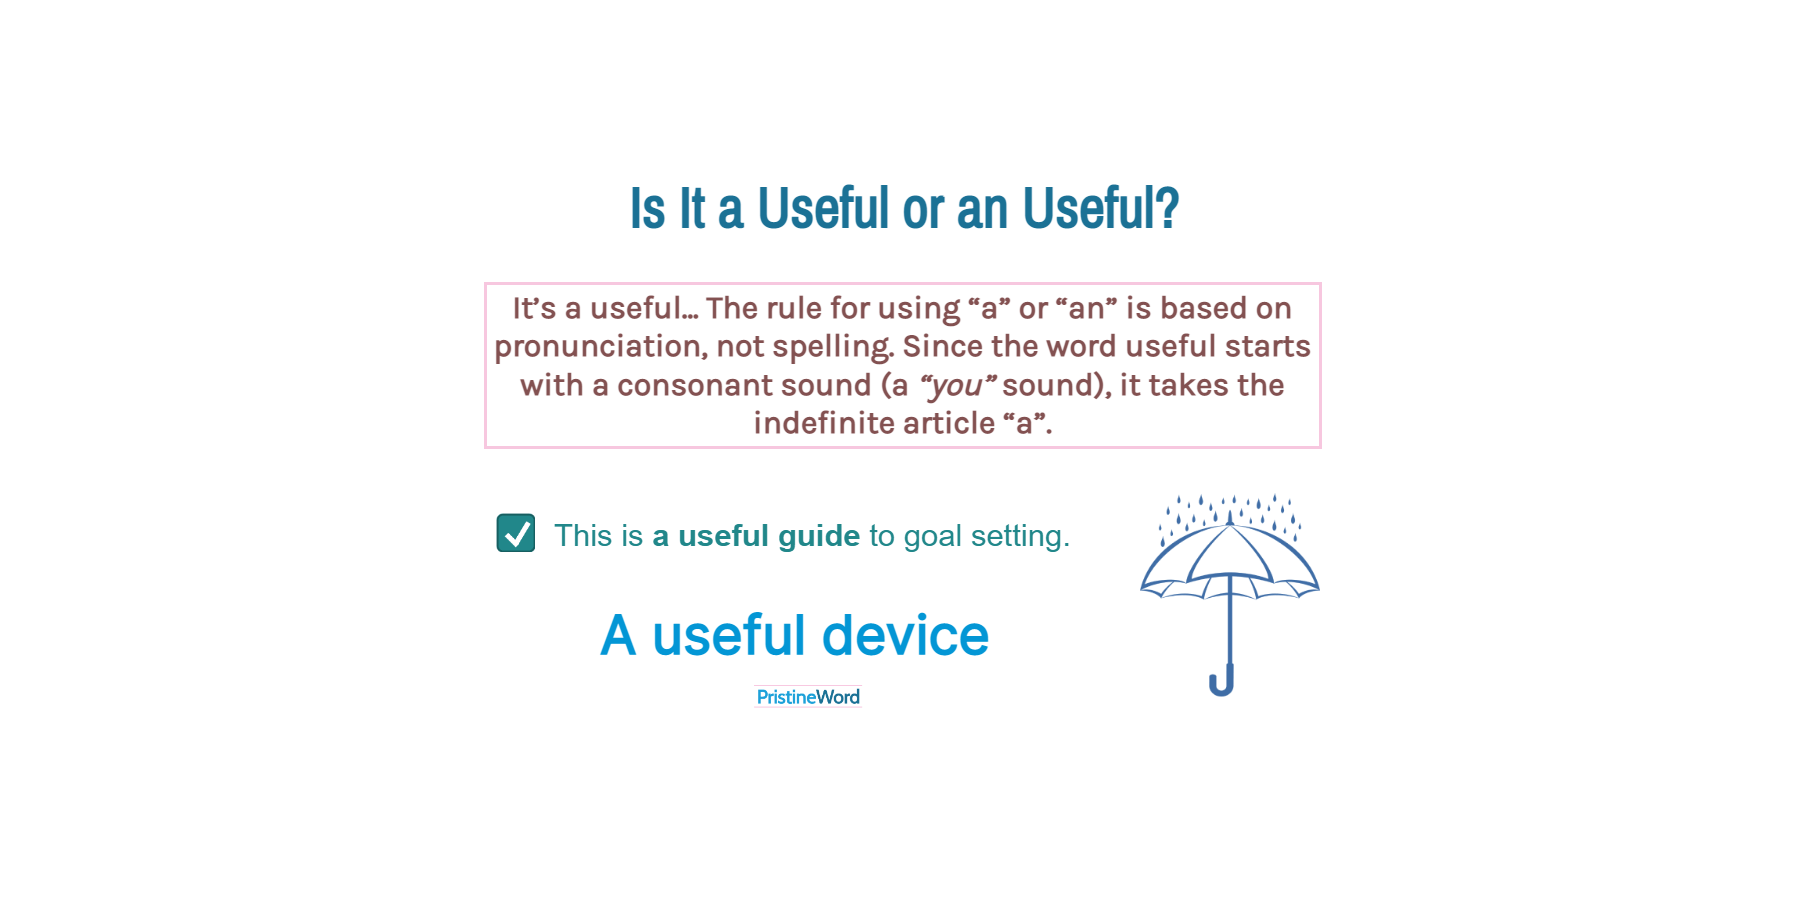 Is It a Useful or an Useful?